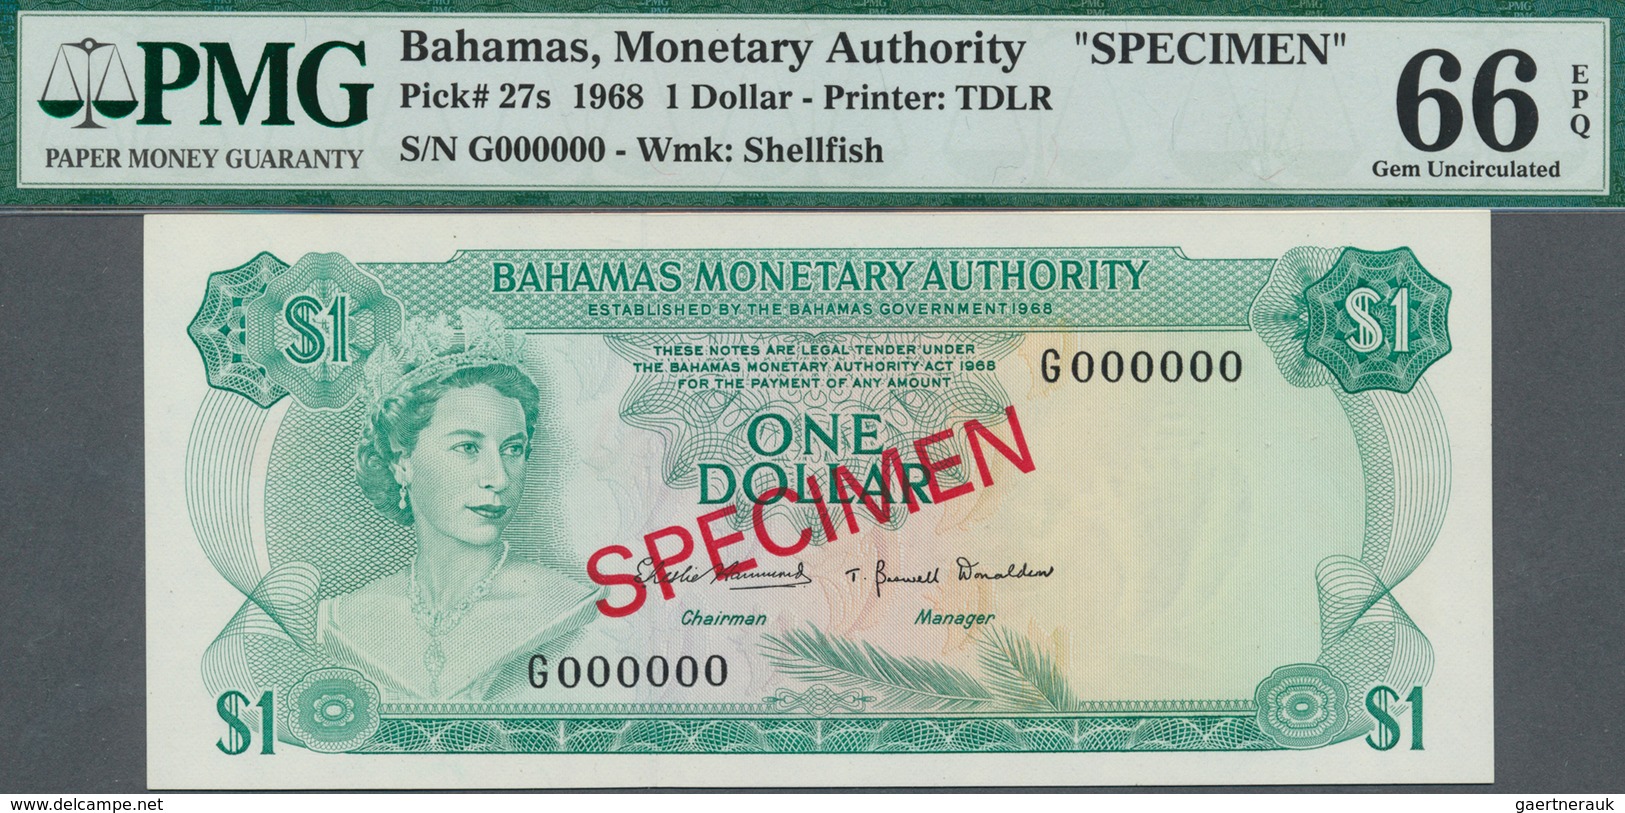 Bahamas: set of 8 SPECIMEN banknotes from 1/2 Dollar 1968 to 100 Dollars 1968 Specimen P. 26s-33s, a